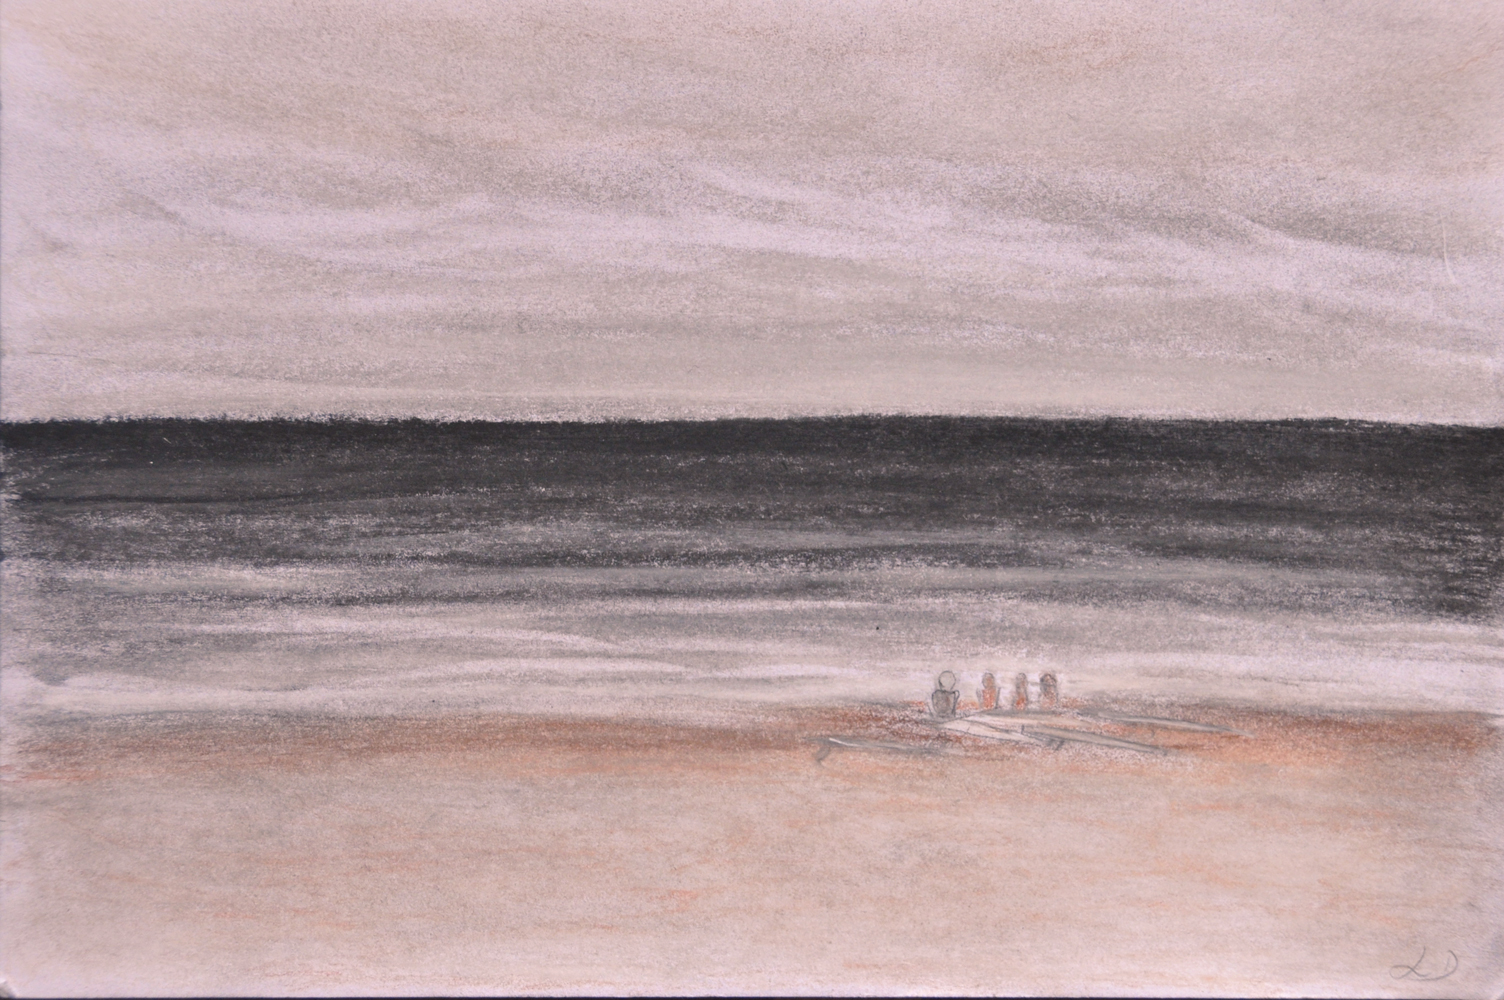 Waiting for the waves, plage du Metro. Sketch, crayon on paper, 16x24, 2017